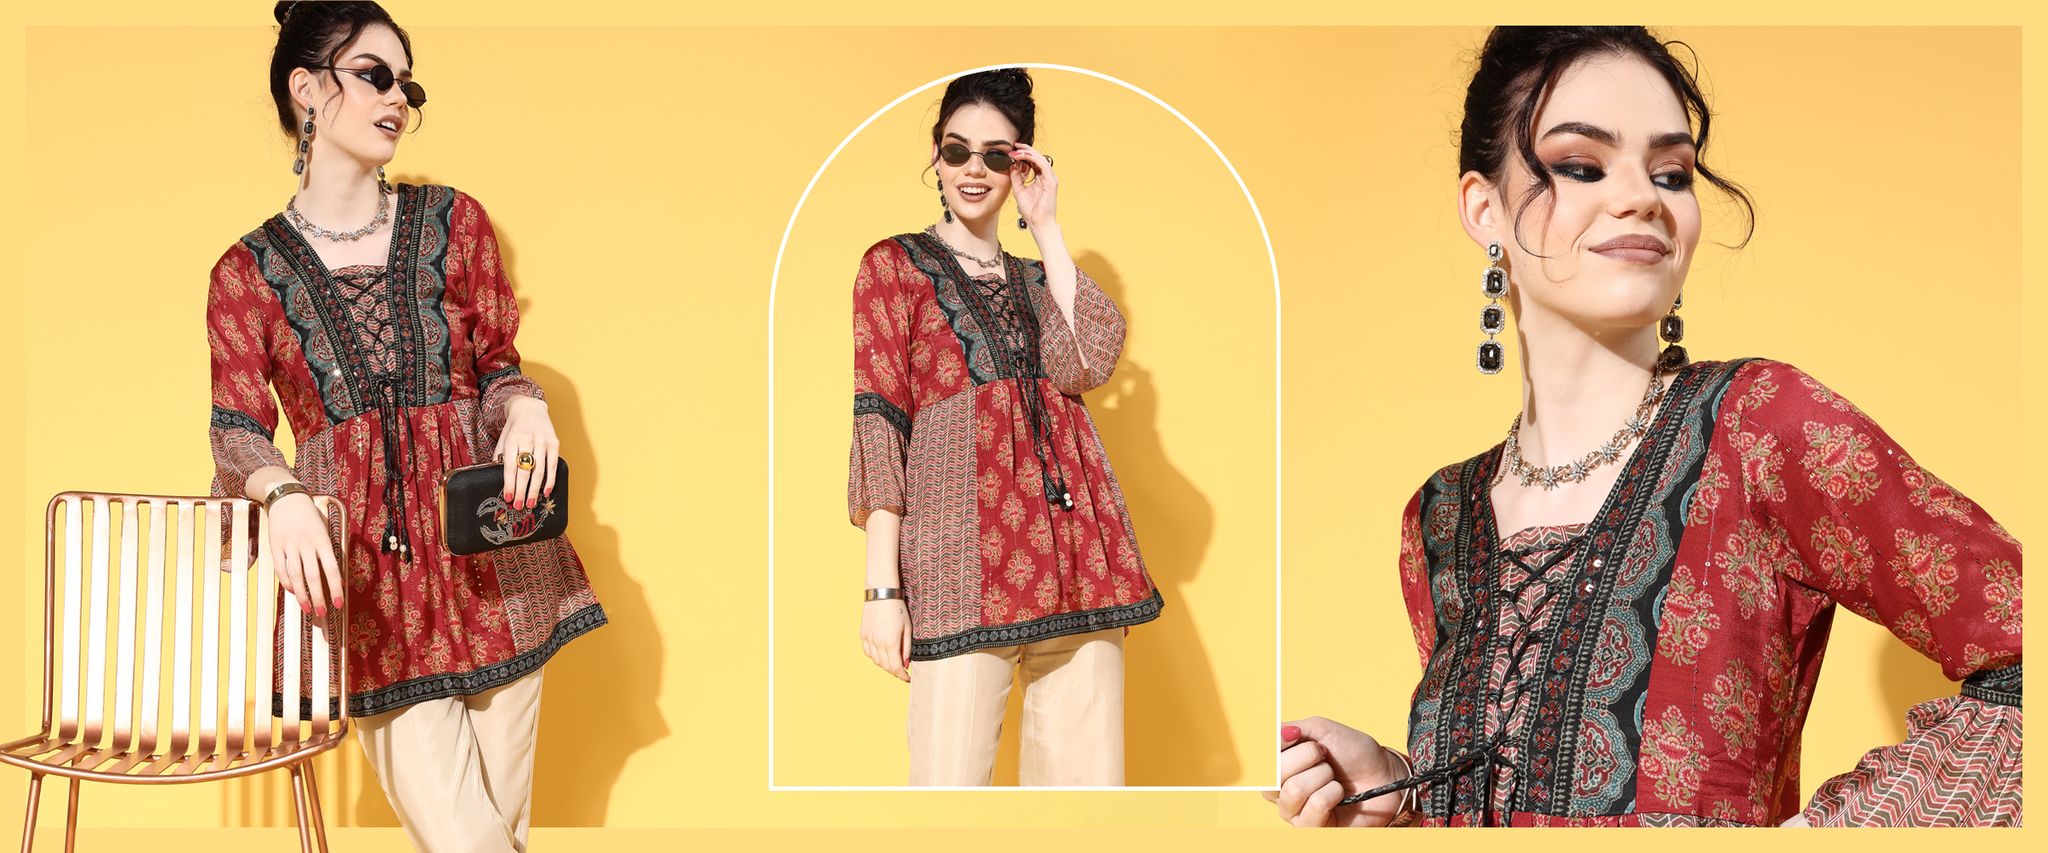 Short Kurtis For Women - Types And Styling Tips